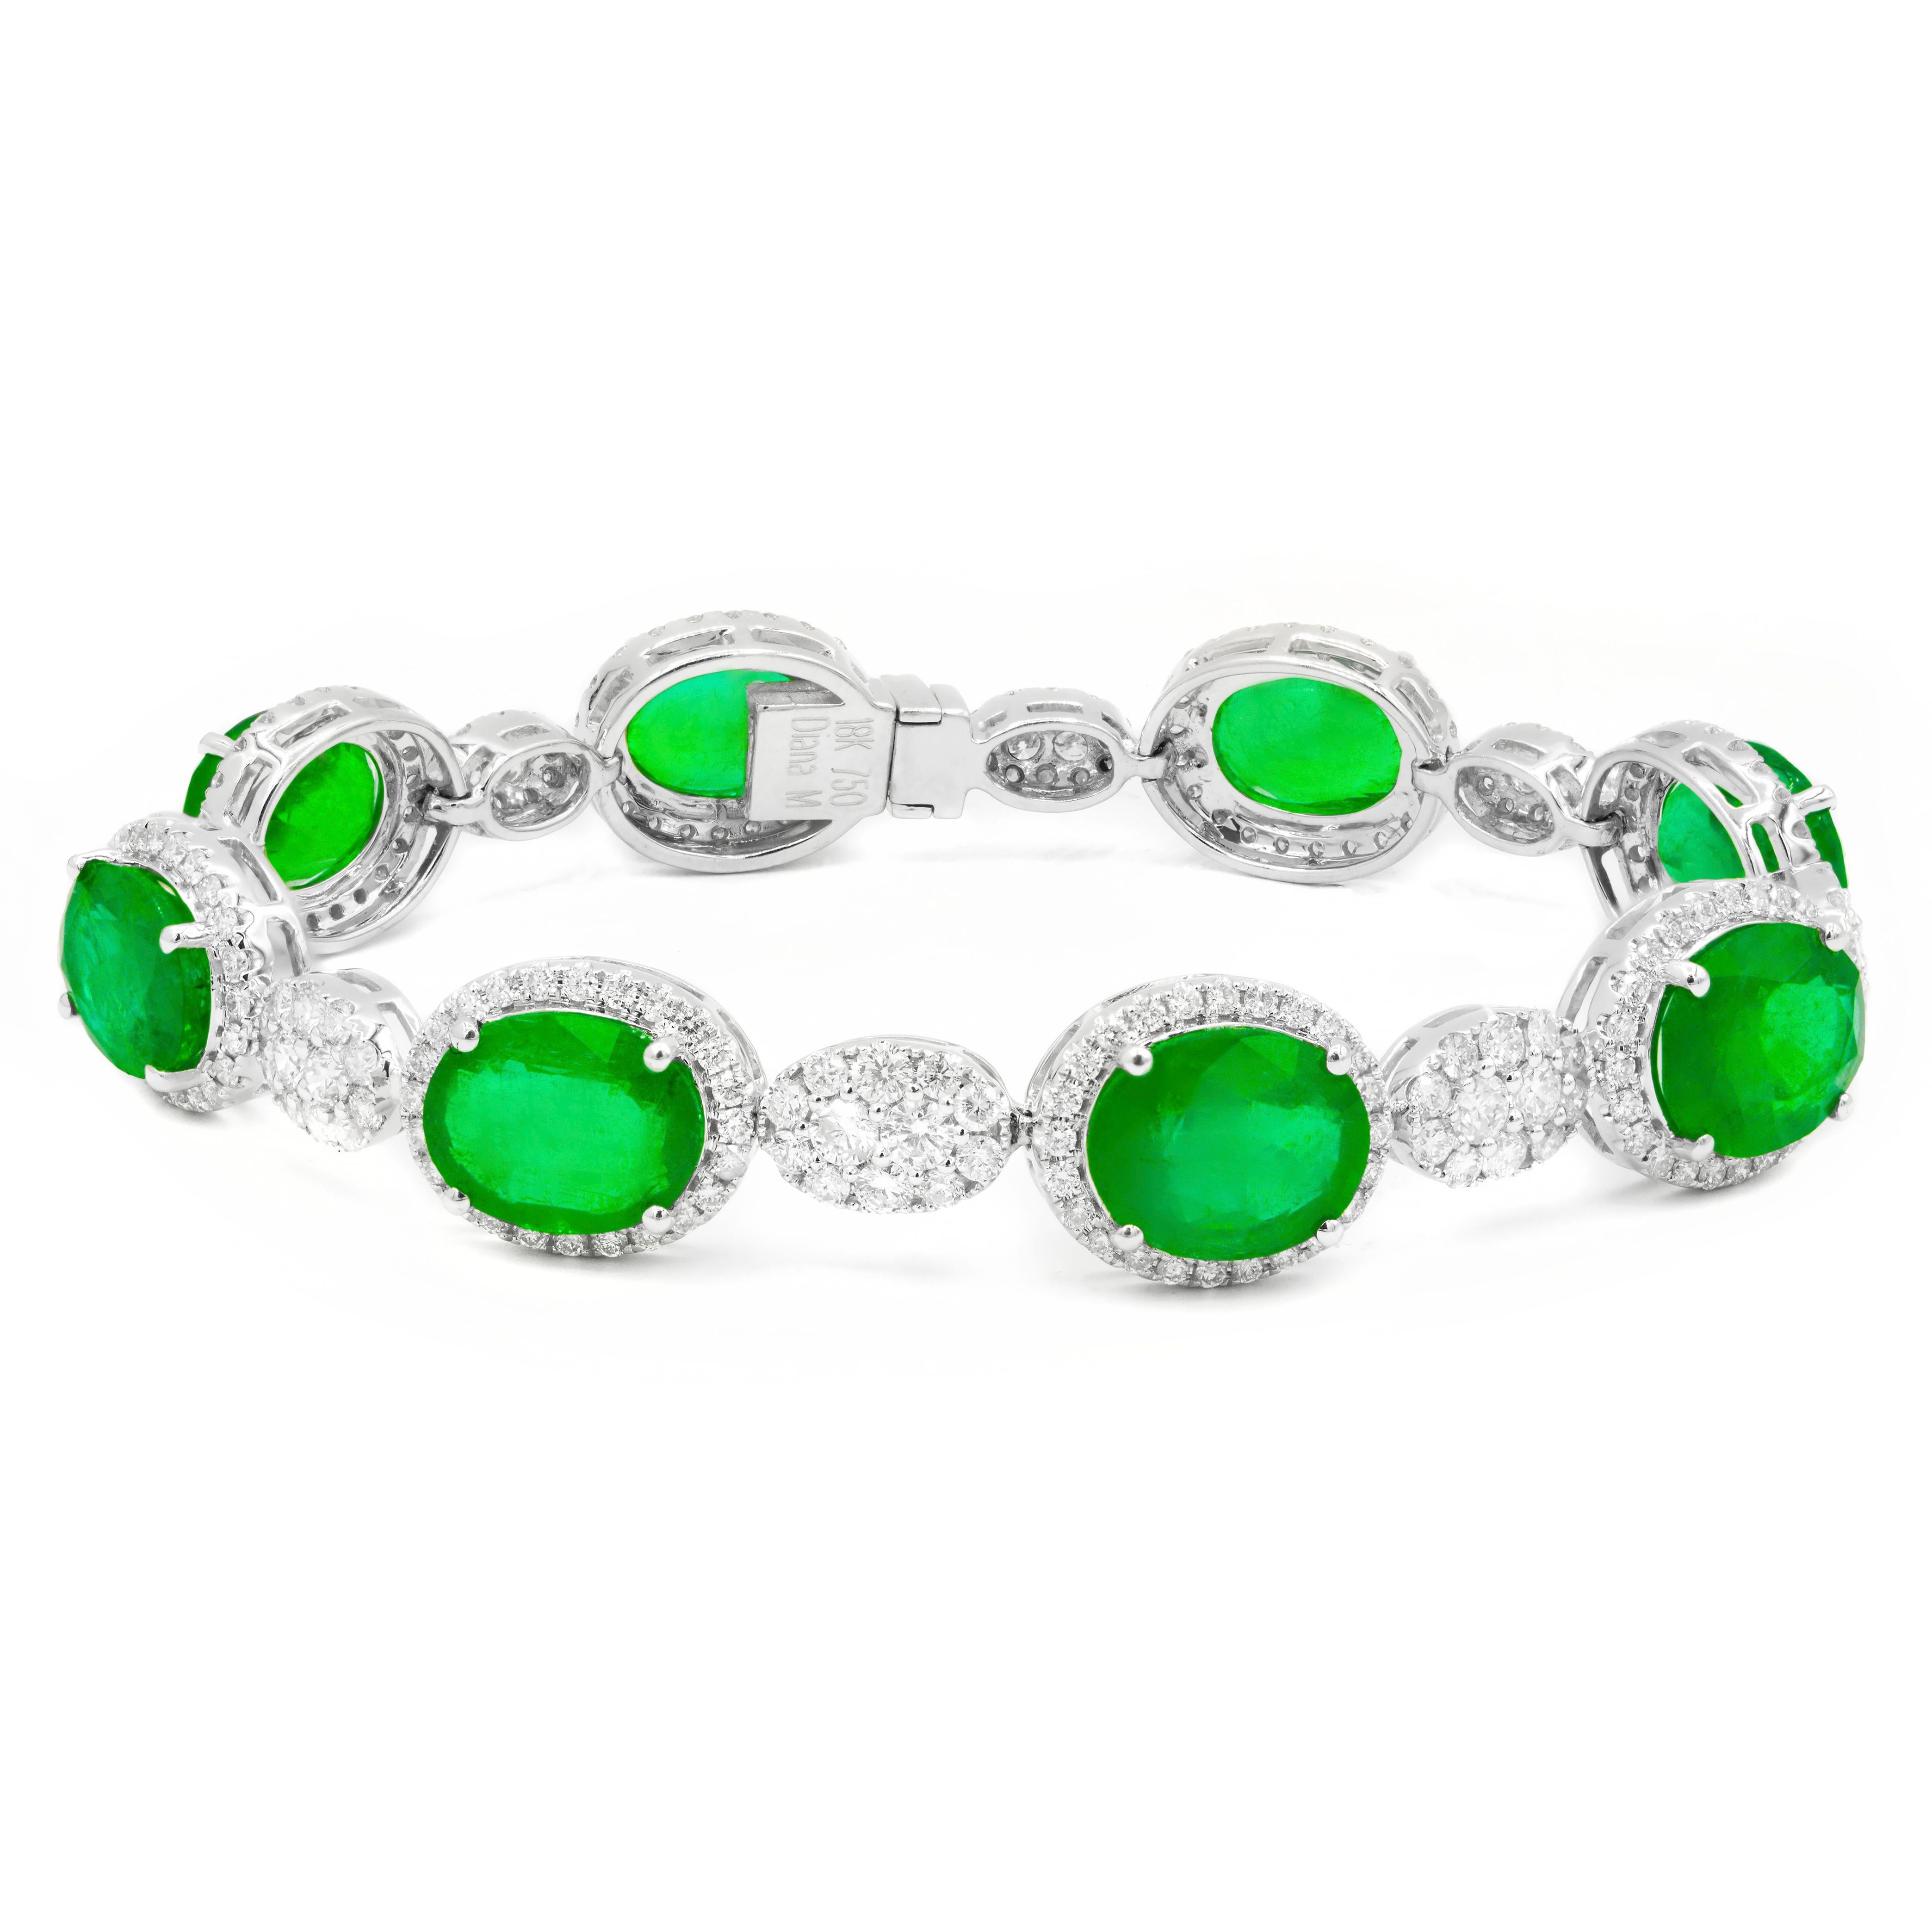 Diana M. 20.37 Carat Oval Cut Emerald and Diamond Bracelet In New Condition For Sale In New York, NY